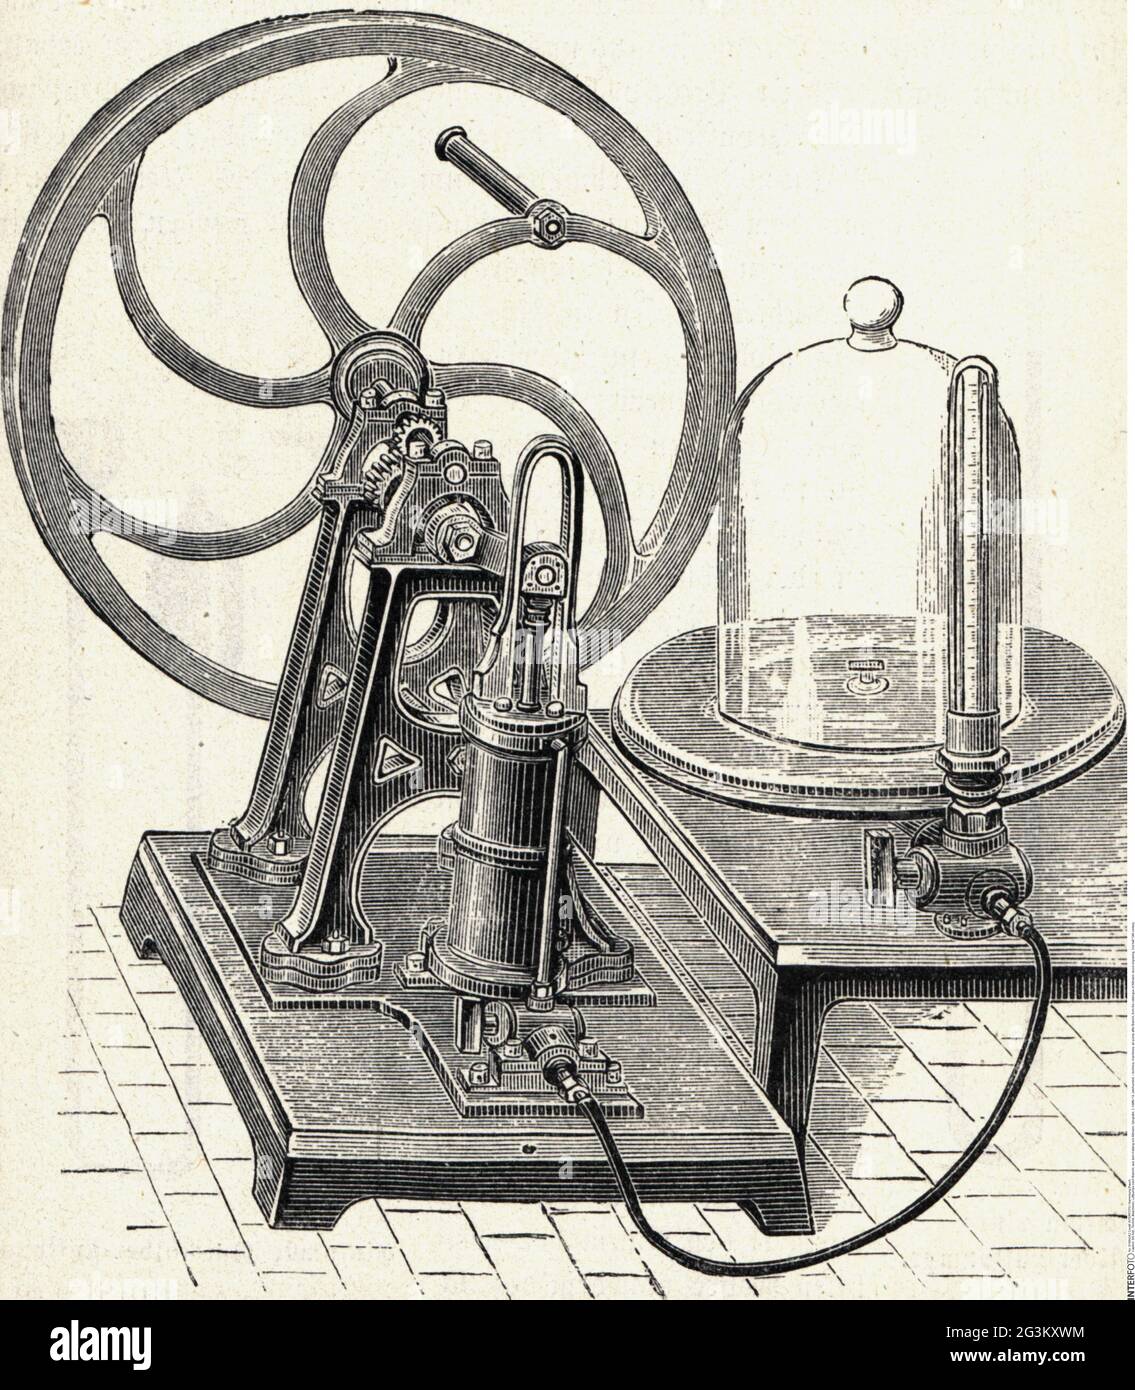 technics, machinery, air-pump after Bianchi, from the catalogue of Altmann, wood engraving, ARTIST'S COPYRIGHT HAS NOT TO BE CLEARED Stock Photo